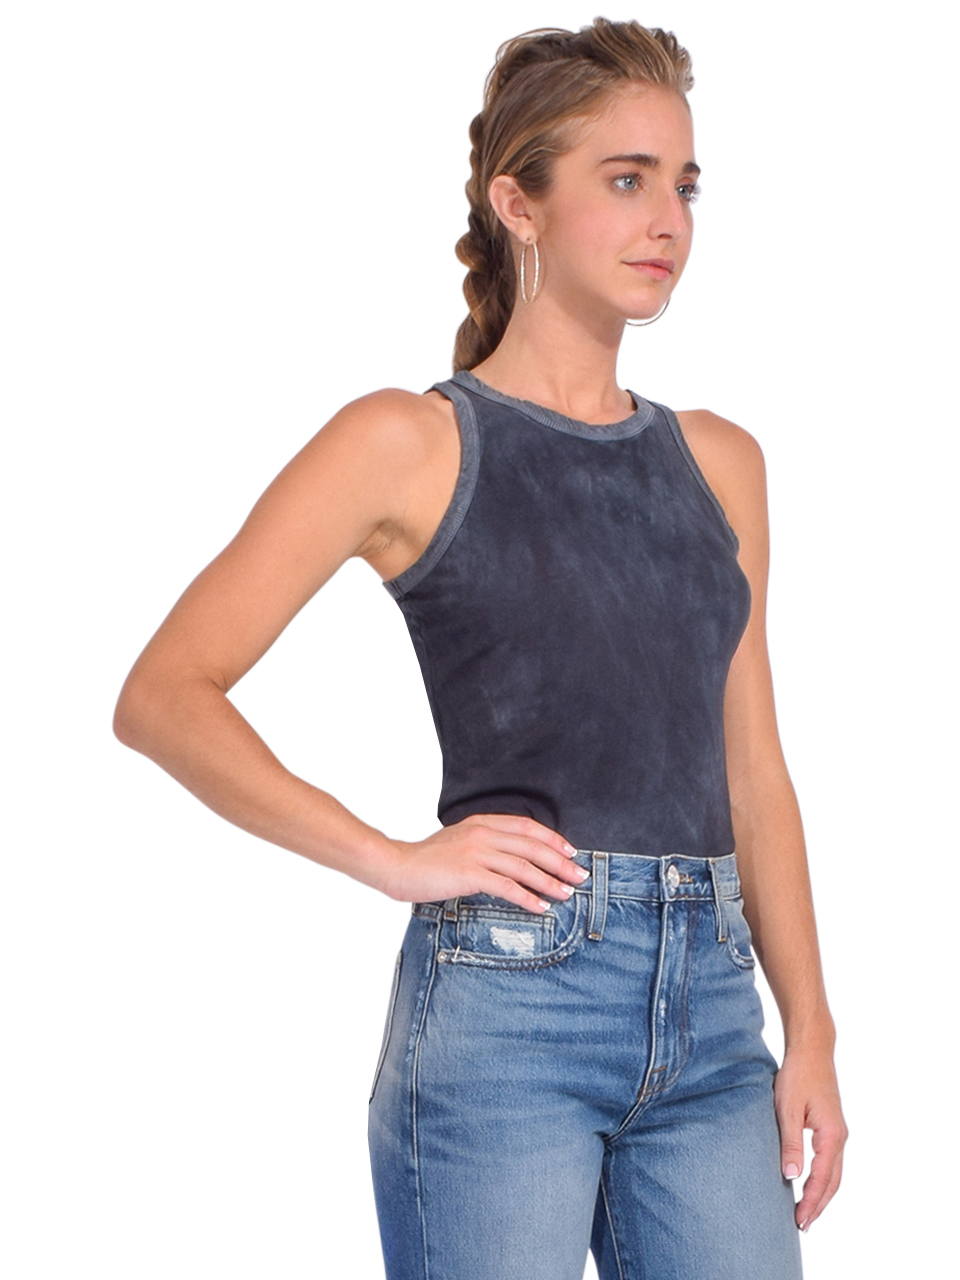 Cotton Citizen Standard Tank in Vintage Oasis Side View 